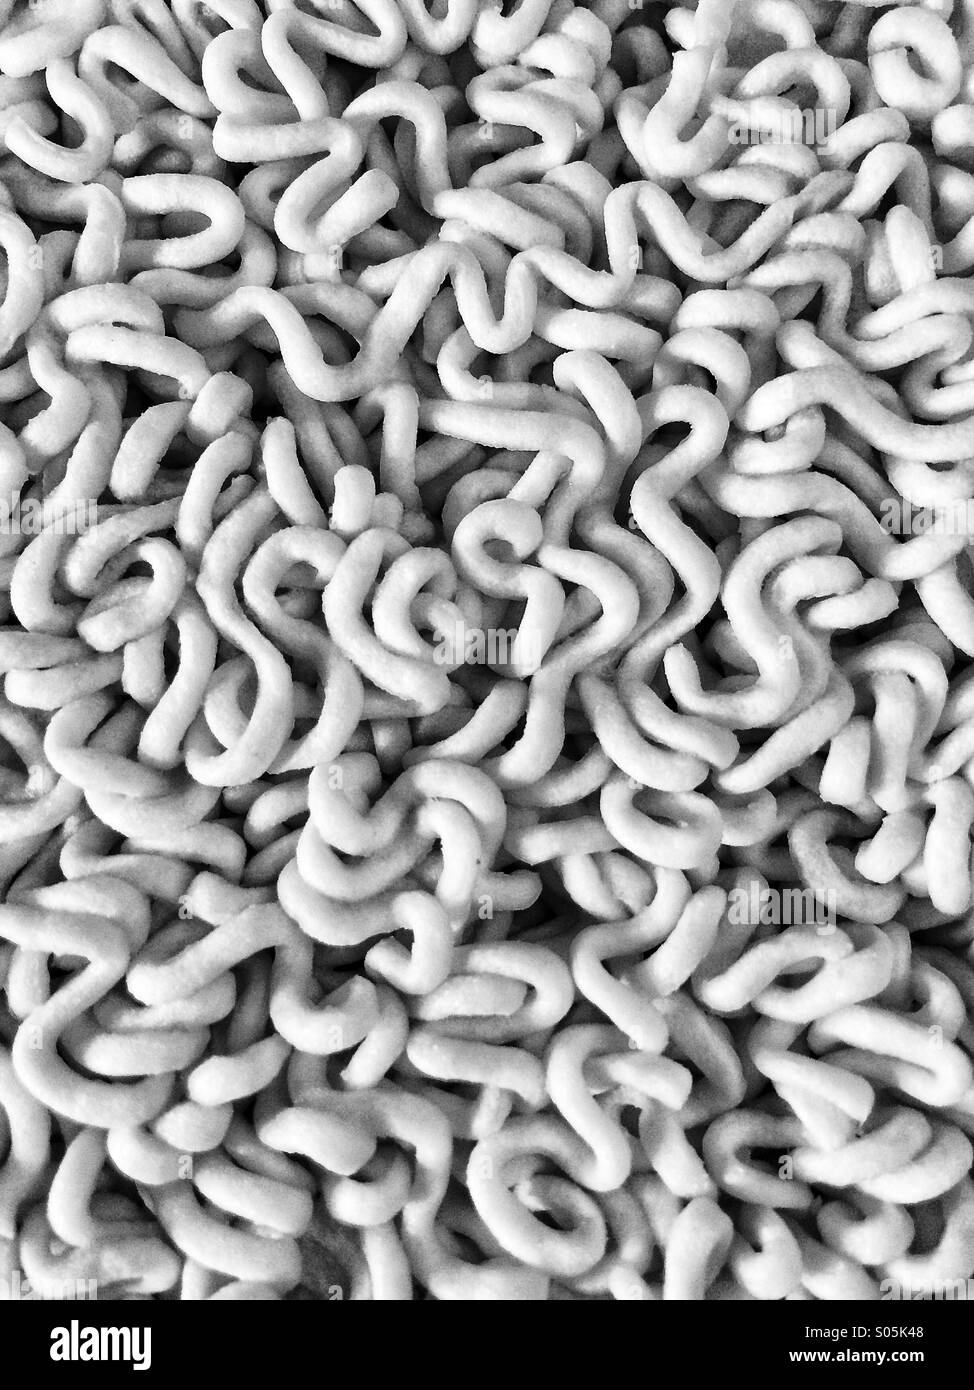 Cropped section of dried ramen noodles Stock Photo